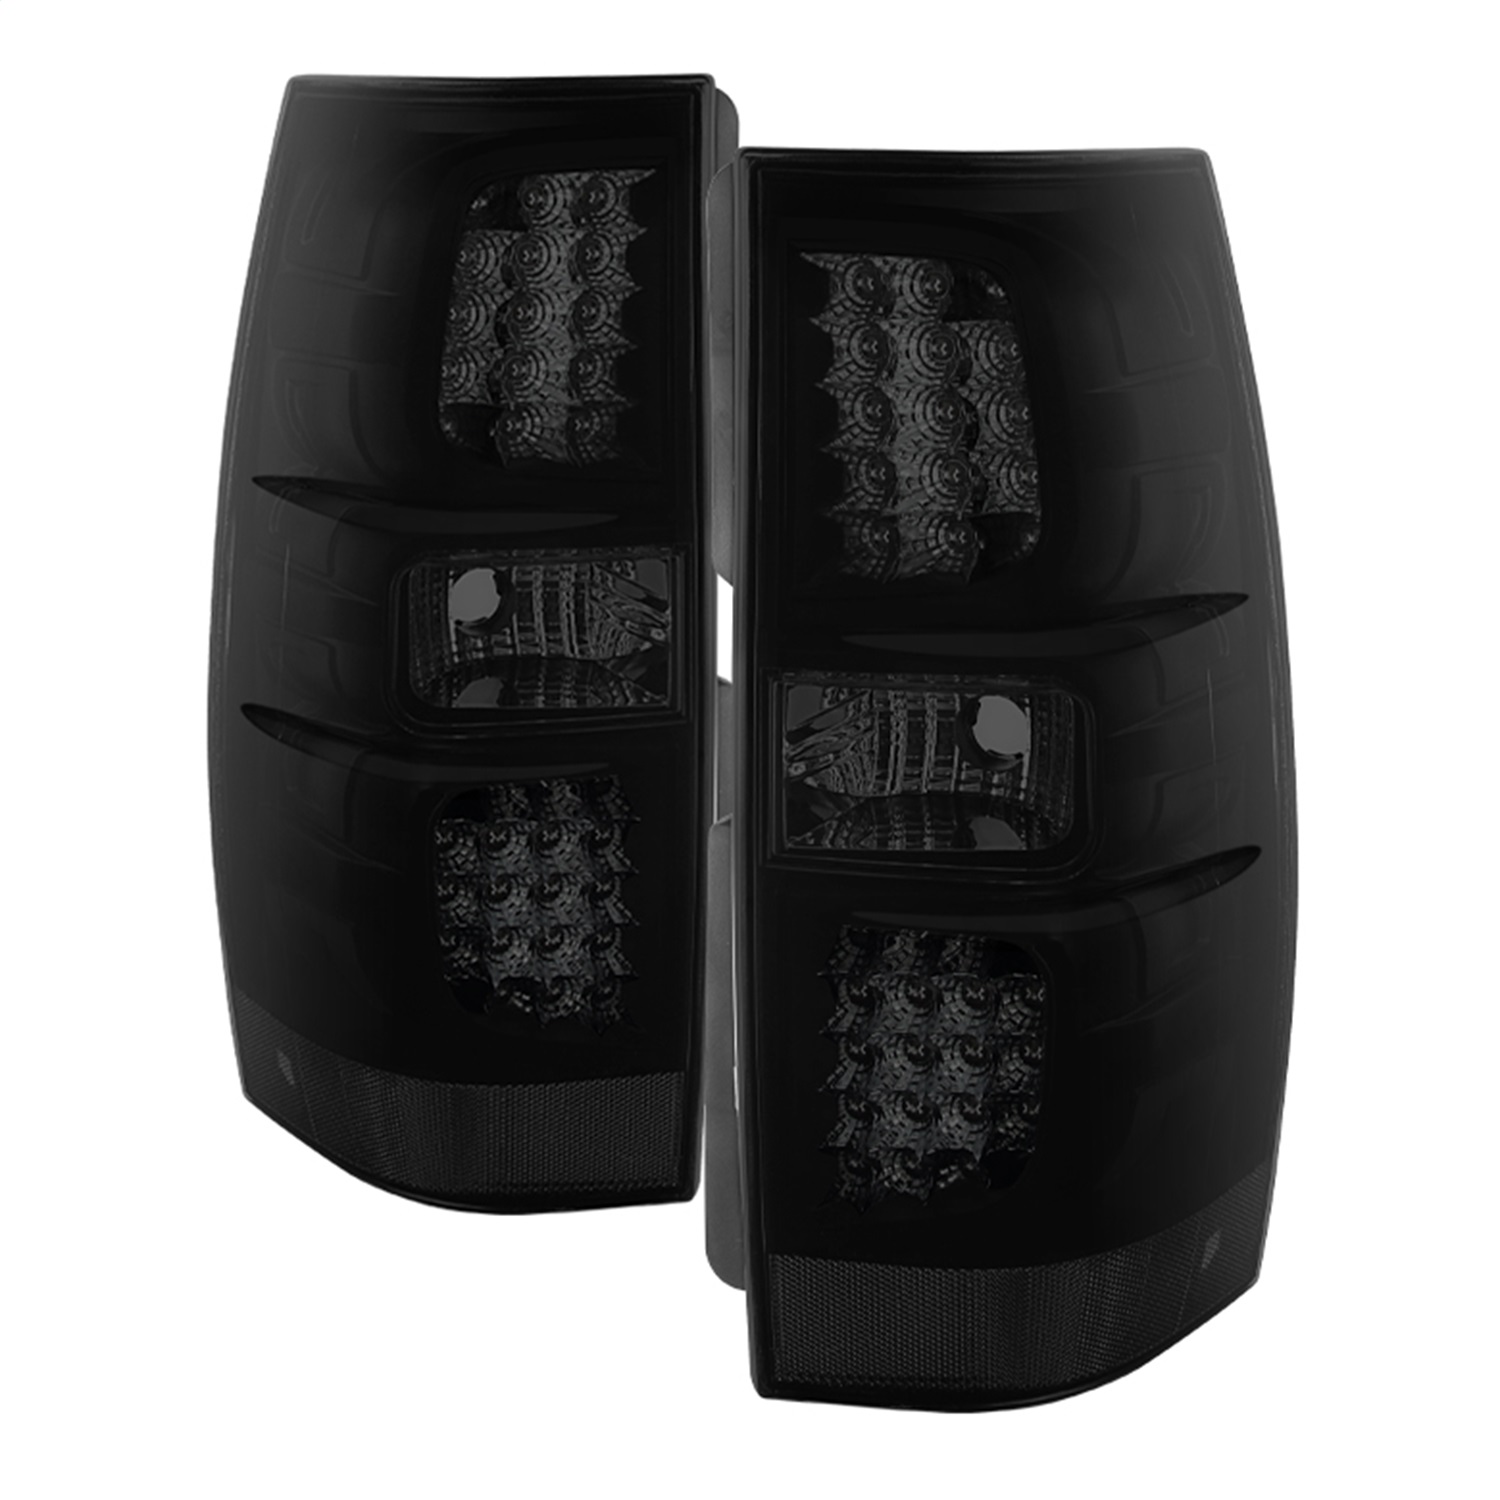 Spyder Auto 9033926 XTune LED Tail Lights